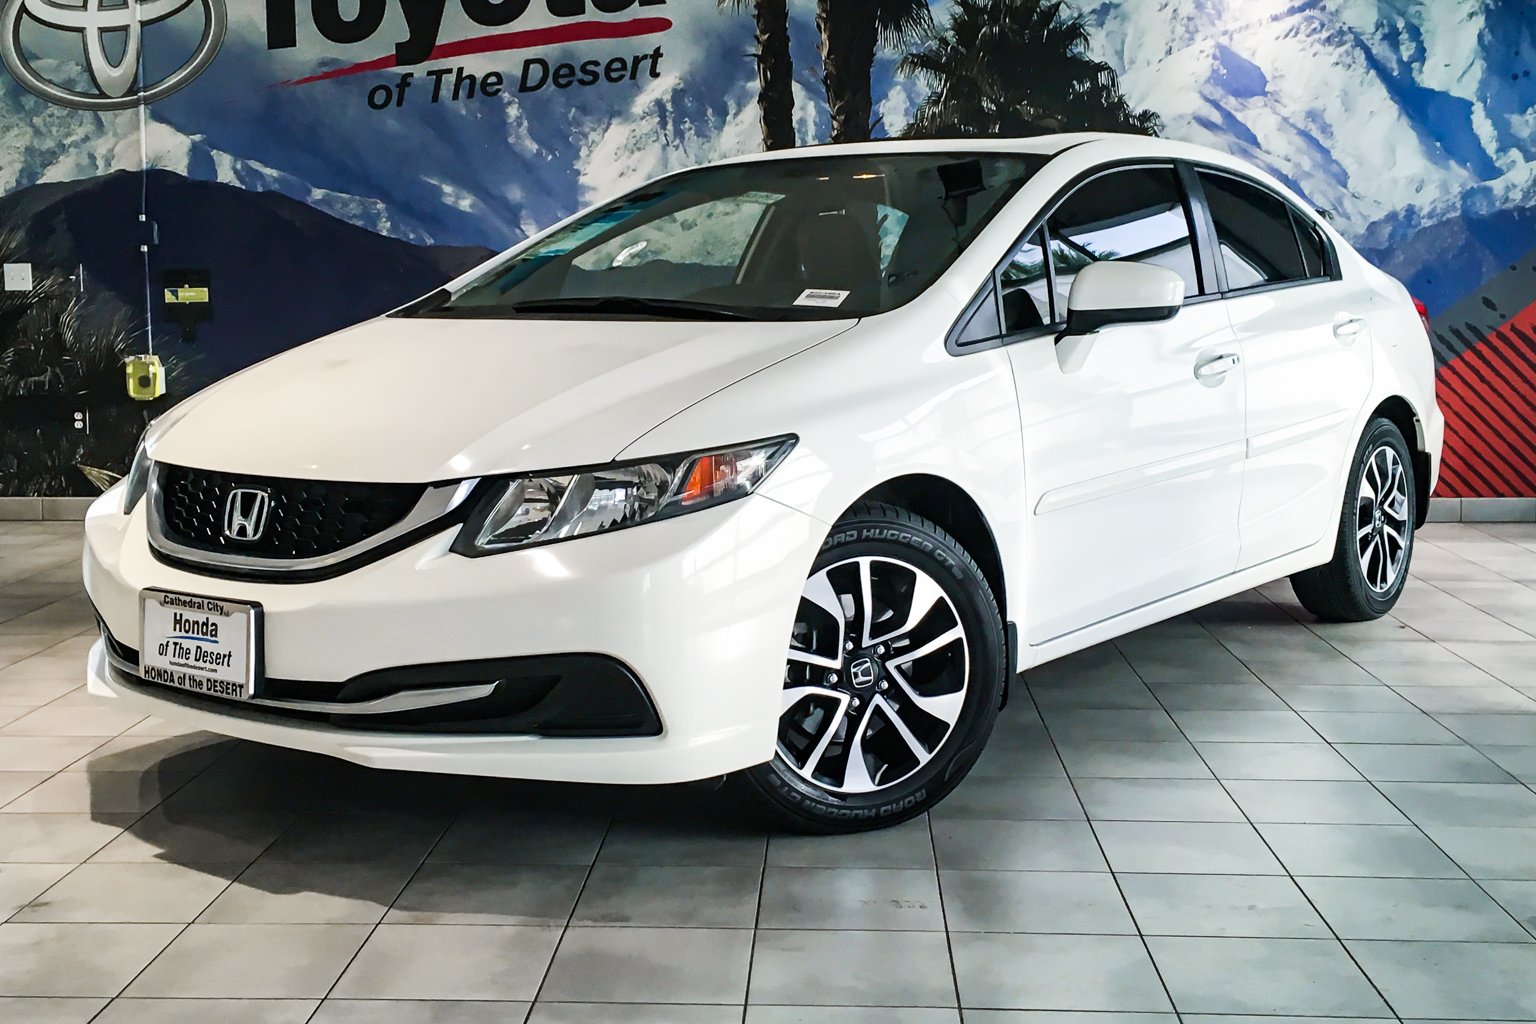 Pre-Owned 2015 Honda Civic Sedan EX 4dr Car in Cathedral City #820396A ...